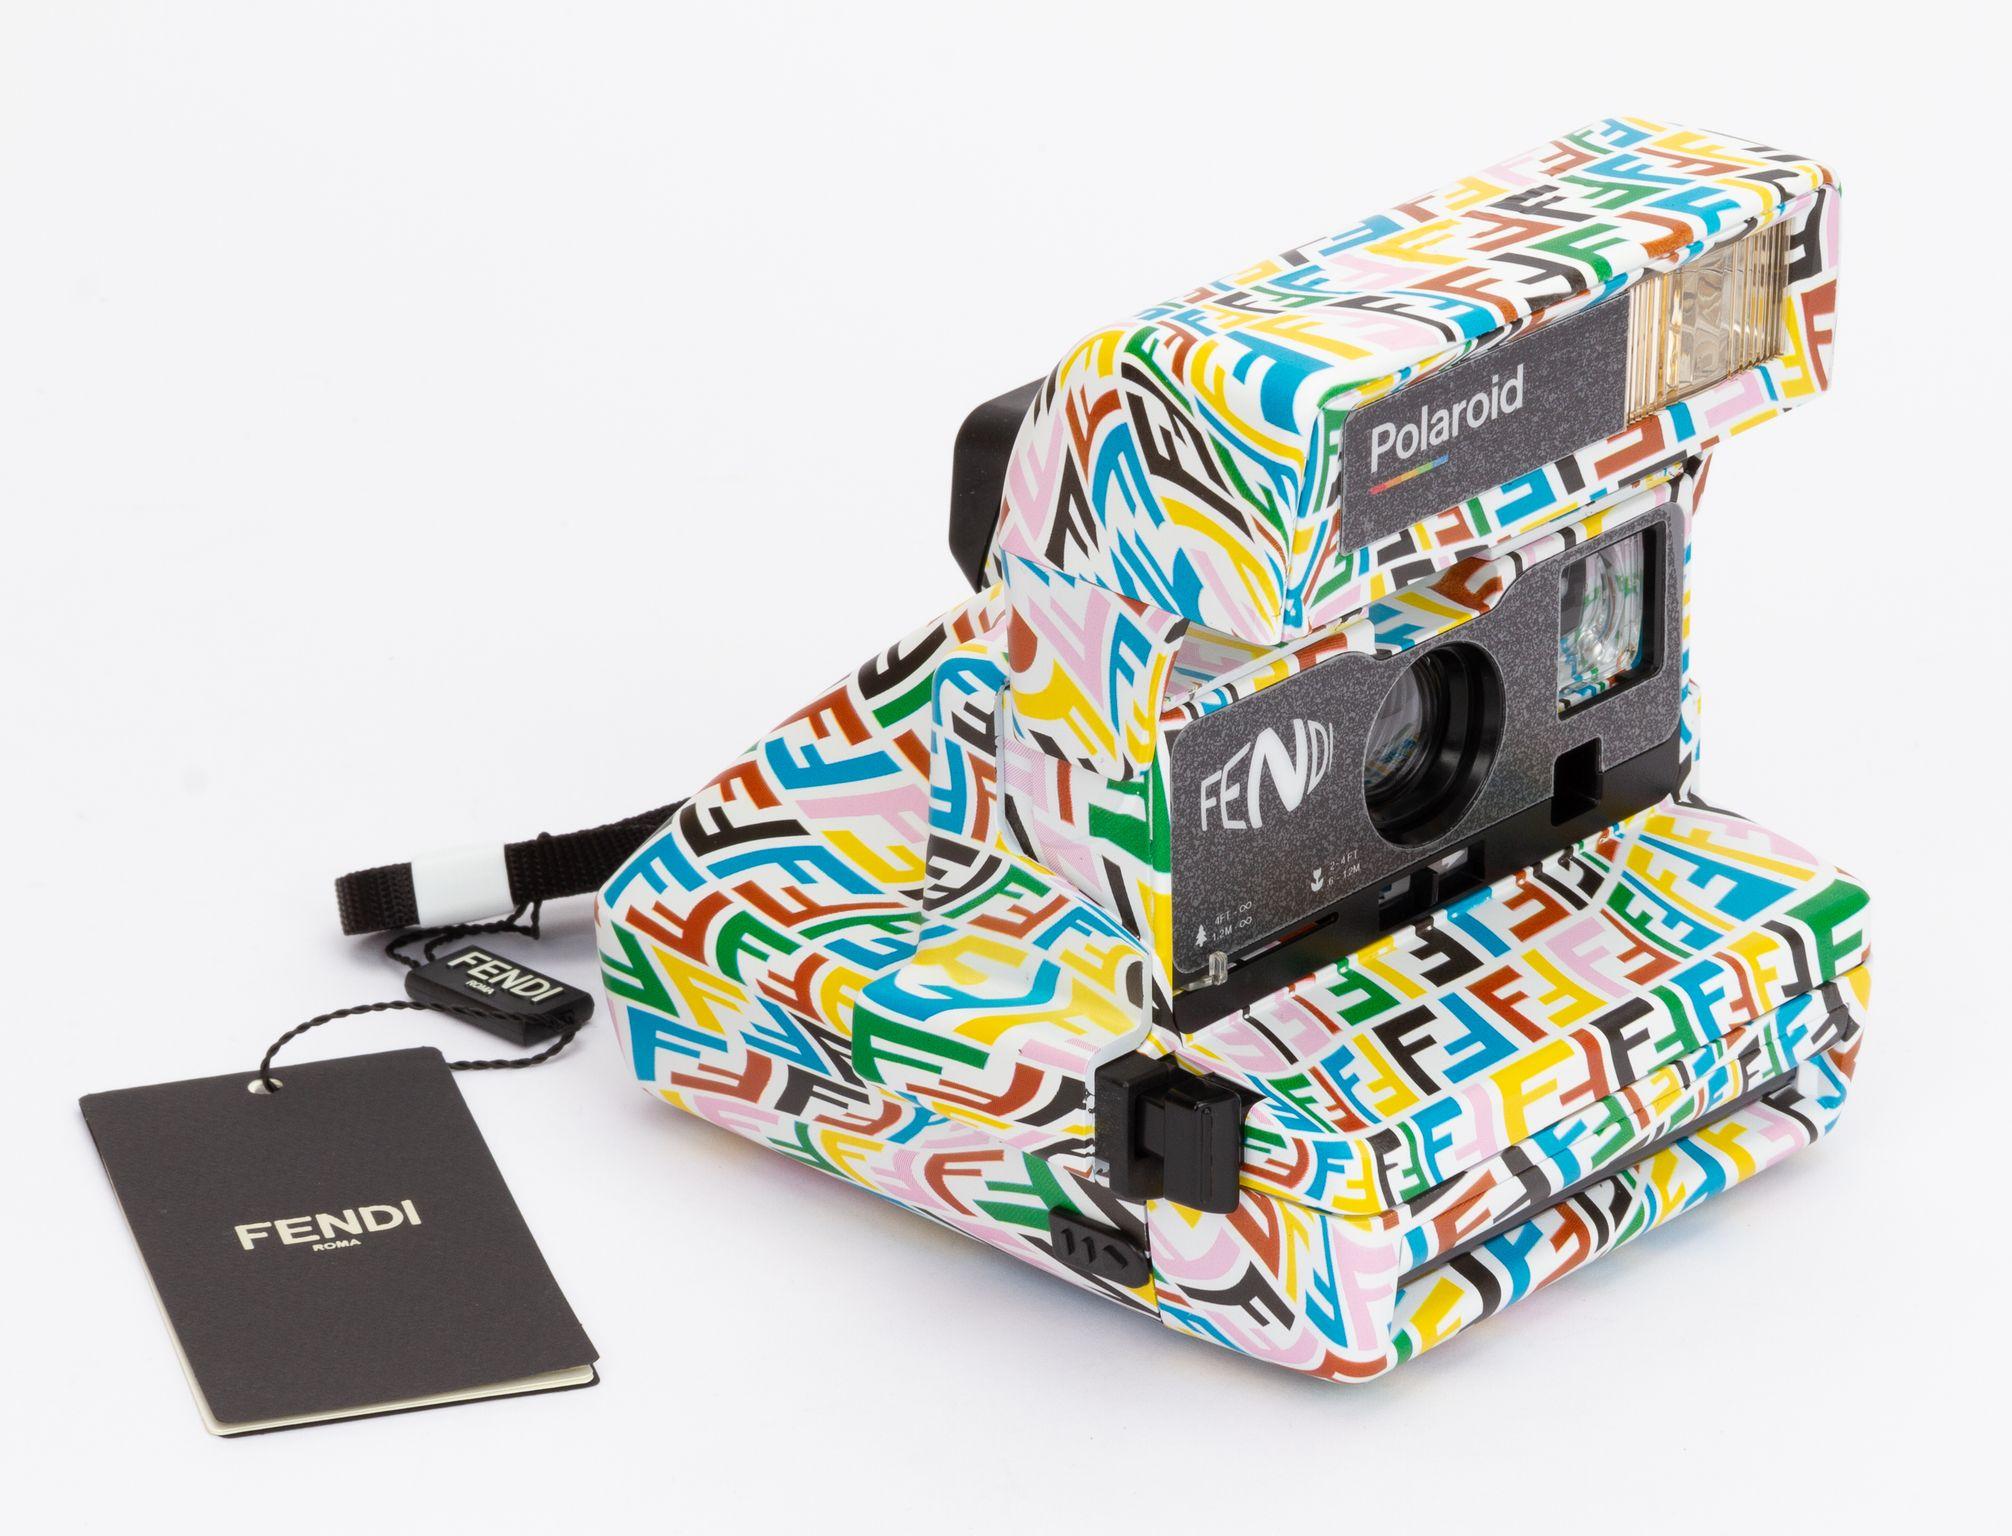 Fendi Polaroid OneStep Close-Up 600 in a “FF Vertigo Motif”. The piece is part of the collaboration between Fendi and artist Sarah Coleman. The camera comes with a shoulder strap (drop 8.5